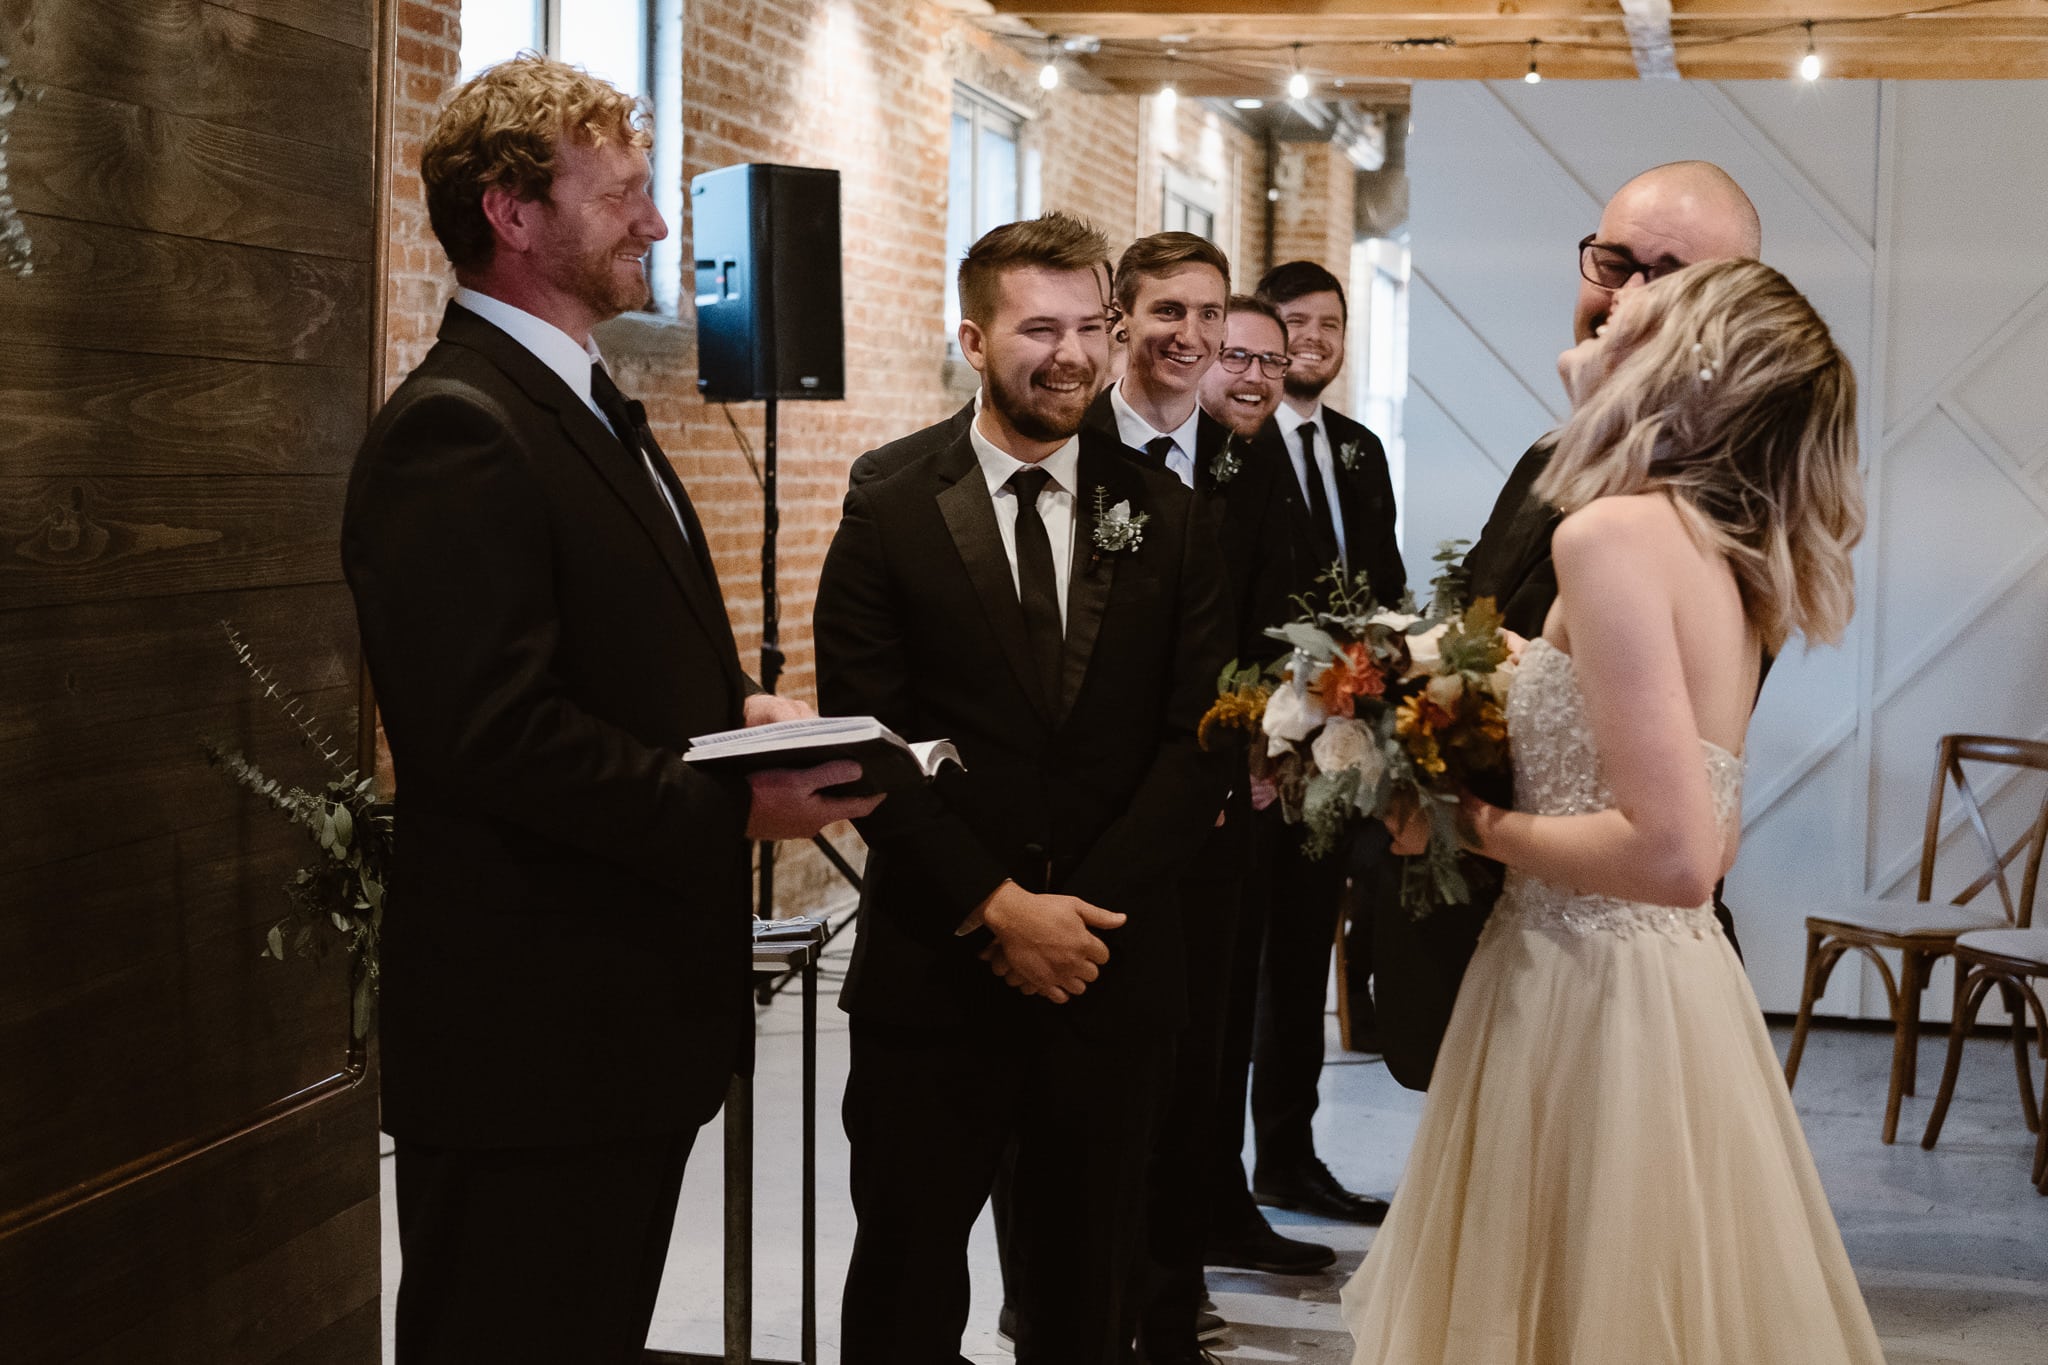 St Vrain Wedding Photographer | Longmont Wedding Photographer | Colorado Winter Wedding Photographer, Colorado industrial chic wedding ceremony, bride walking down aisle with her father